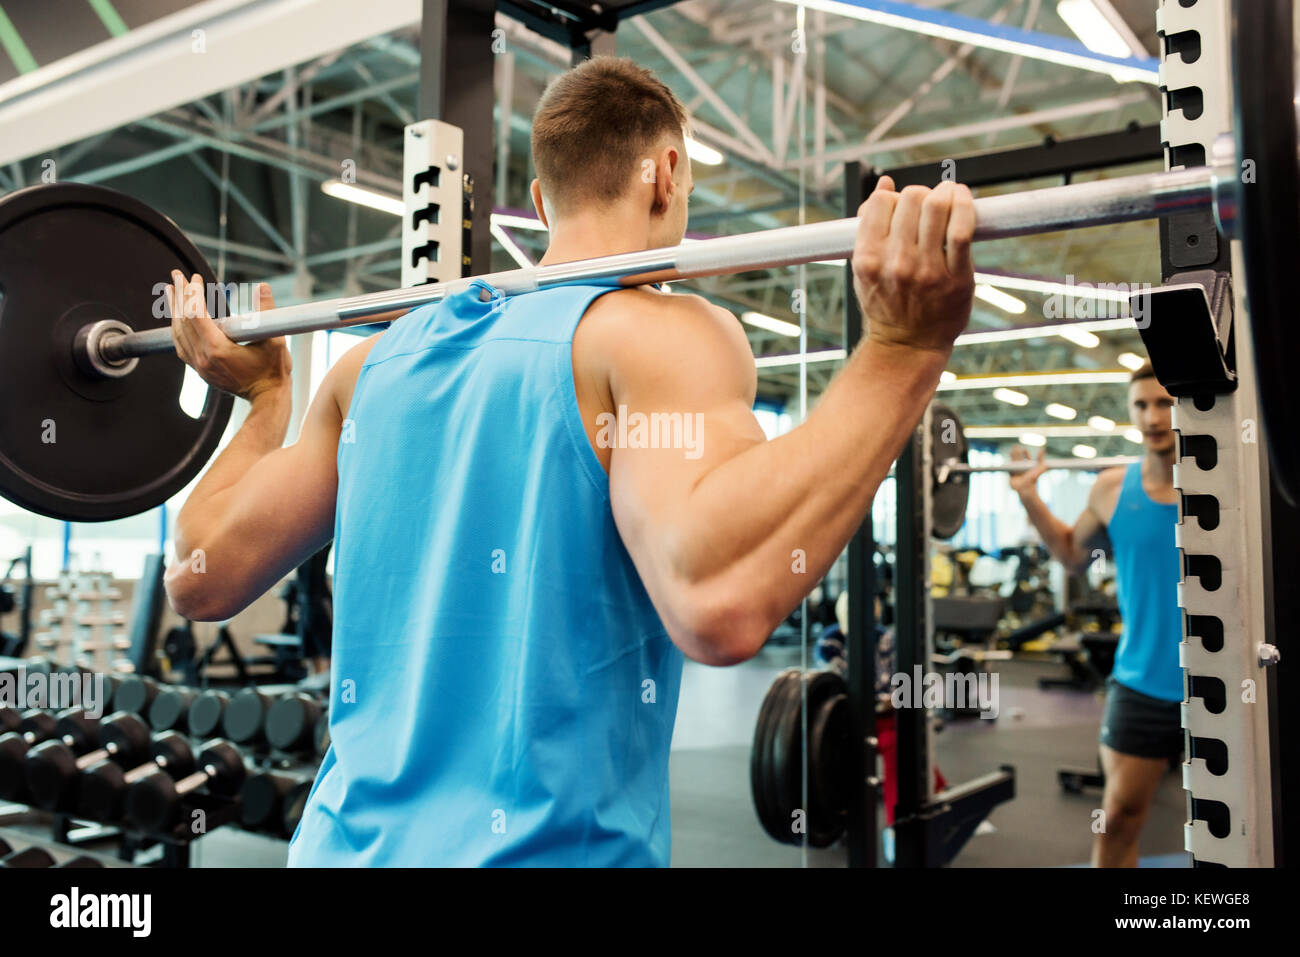 Strong Man Lifting Barbell in Gym Stock Photo